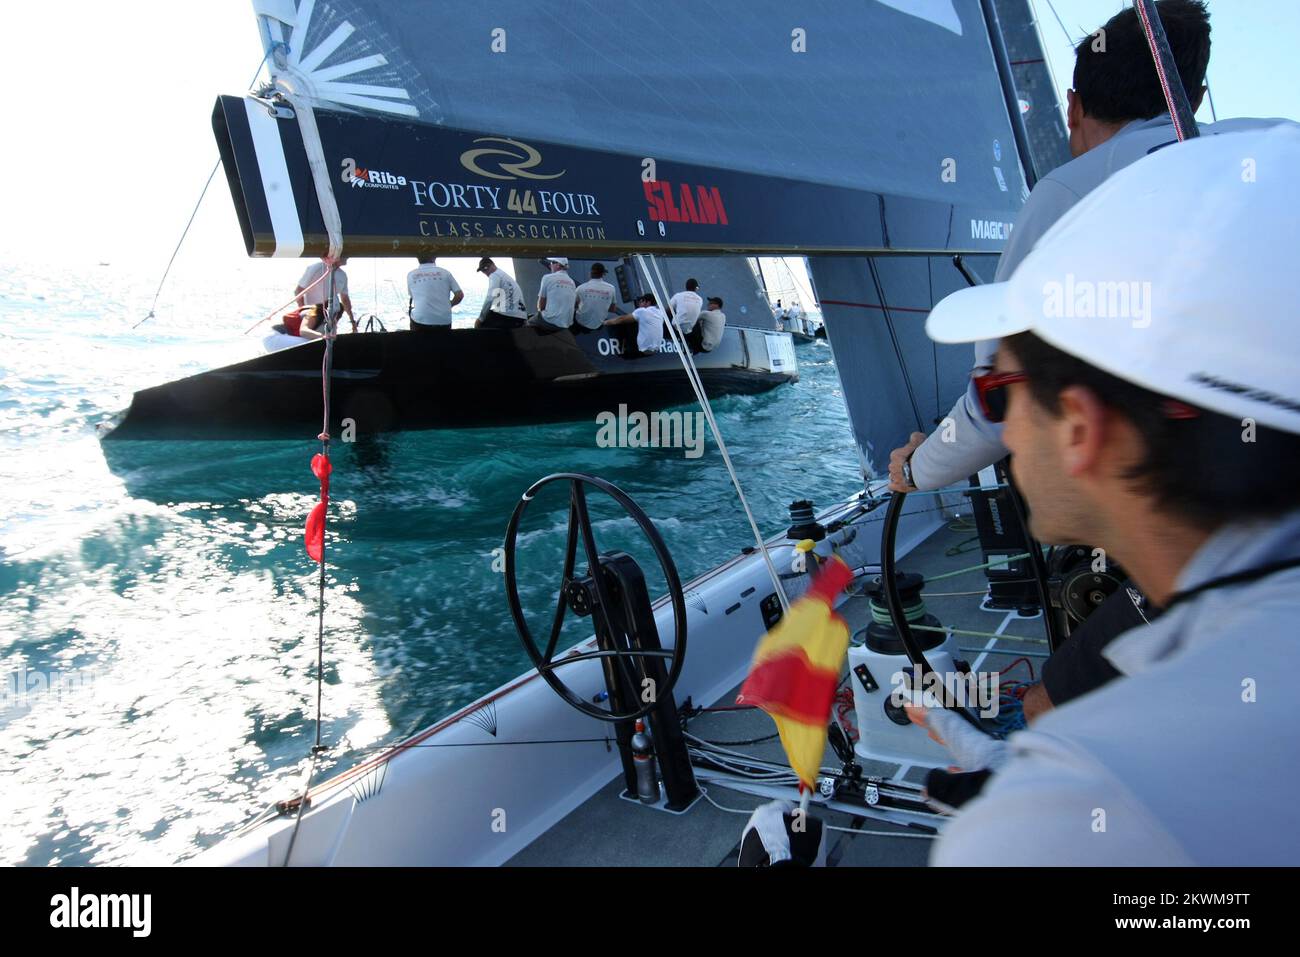 The 5th and last day of the prestigious sailing competition, Adris RC 44 cup, discipline Fleet race. Stock Photo